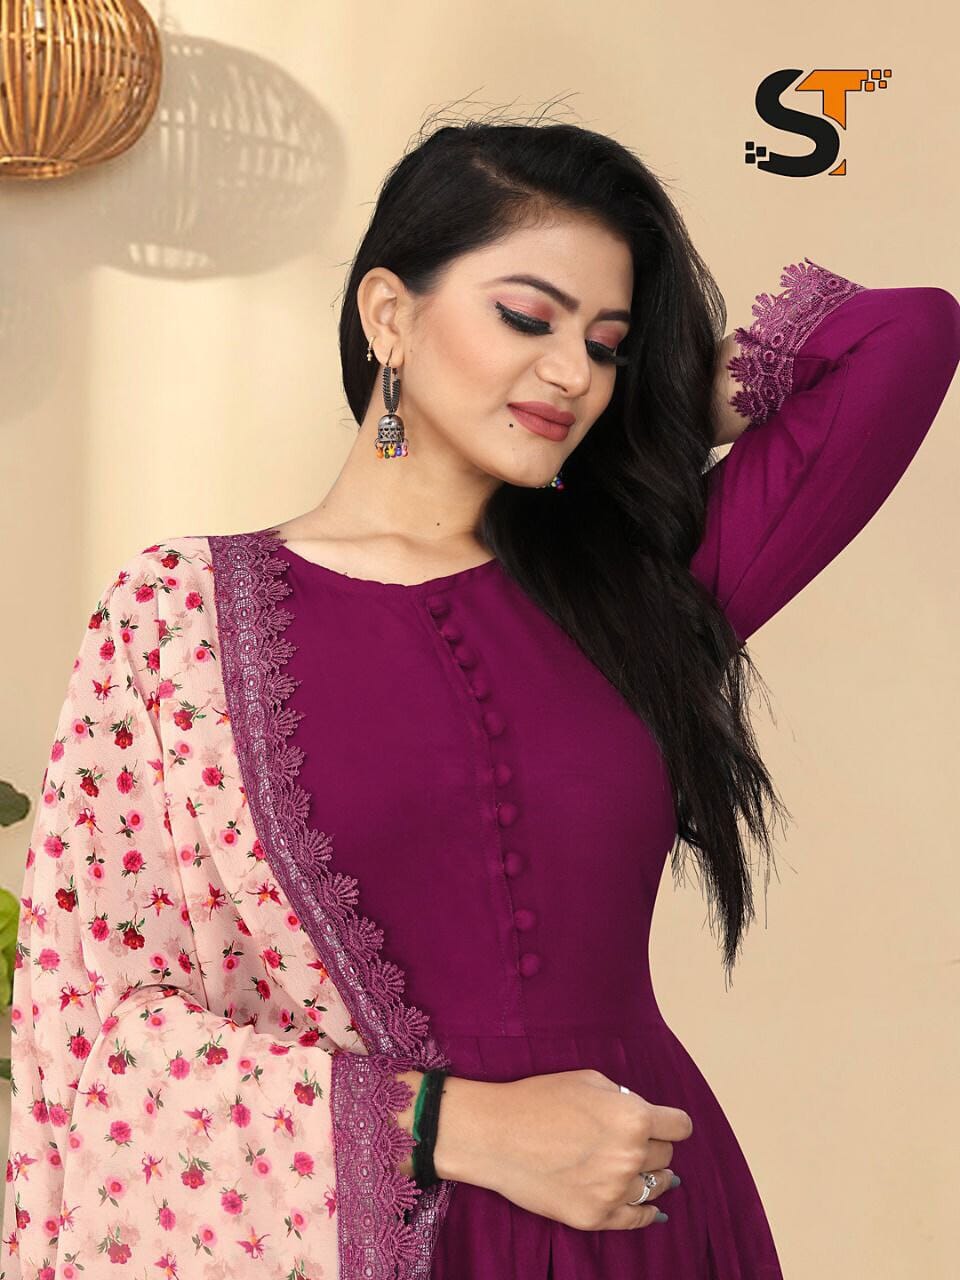 Majenta Pink Heavy Rayon Gown with Geogette Dupatta shopindi.sg 